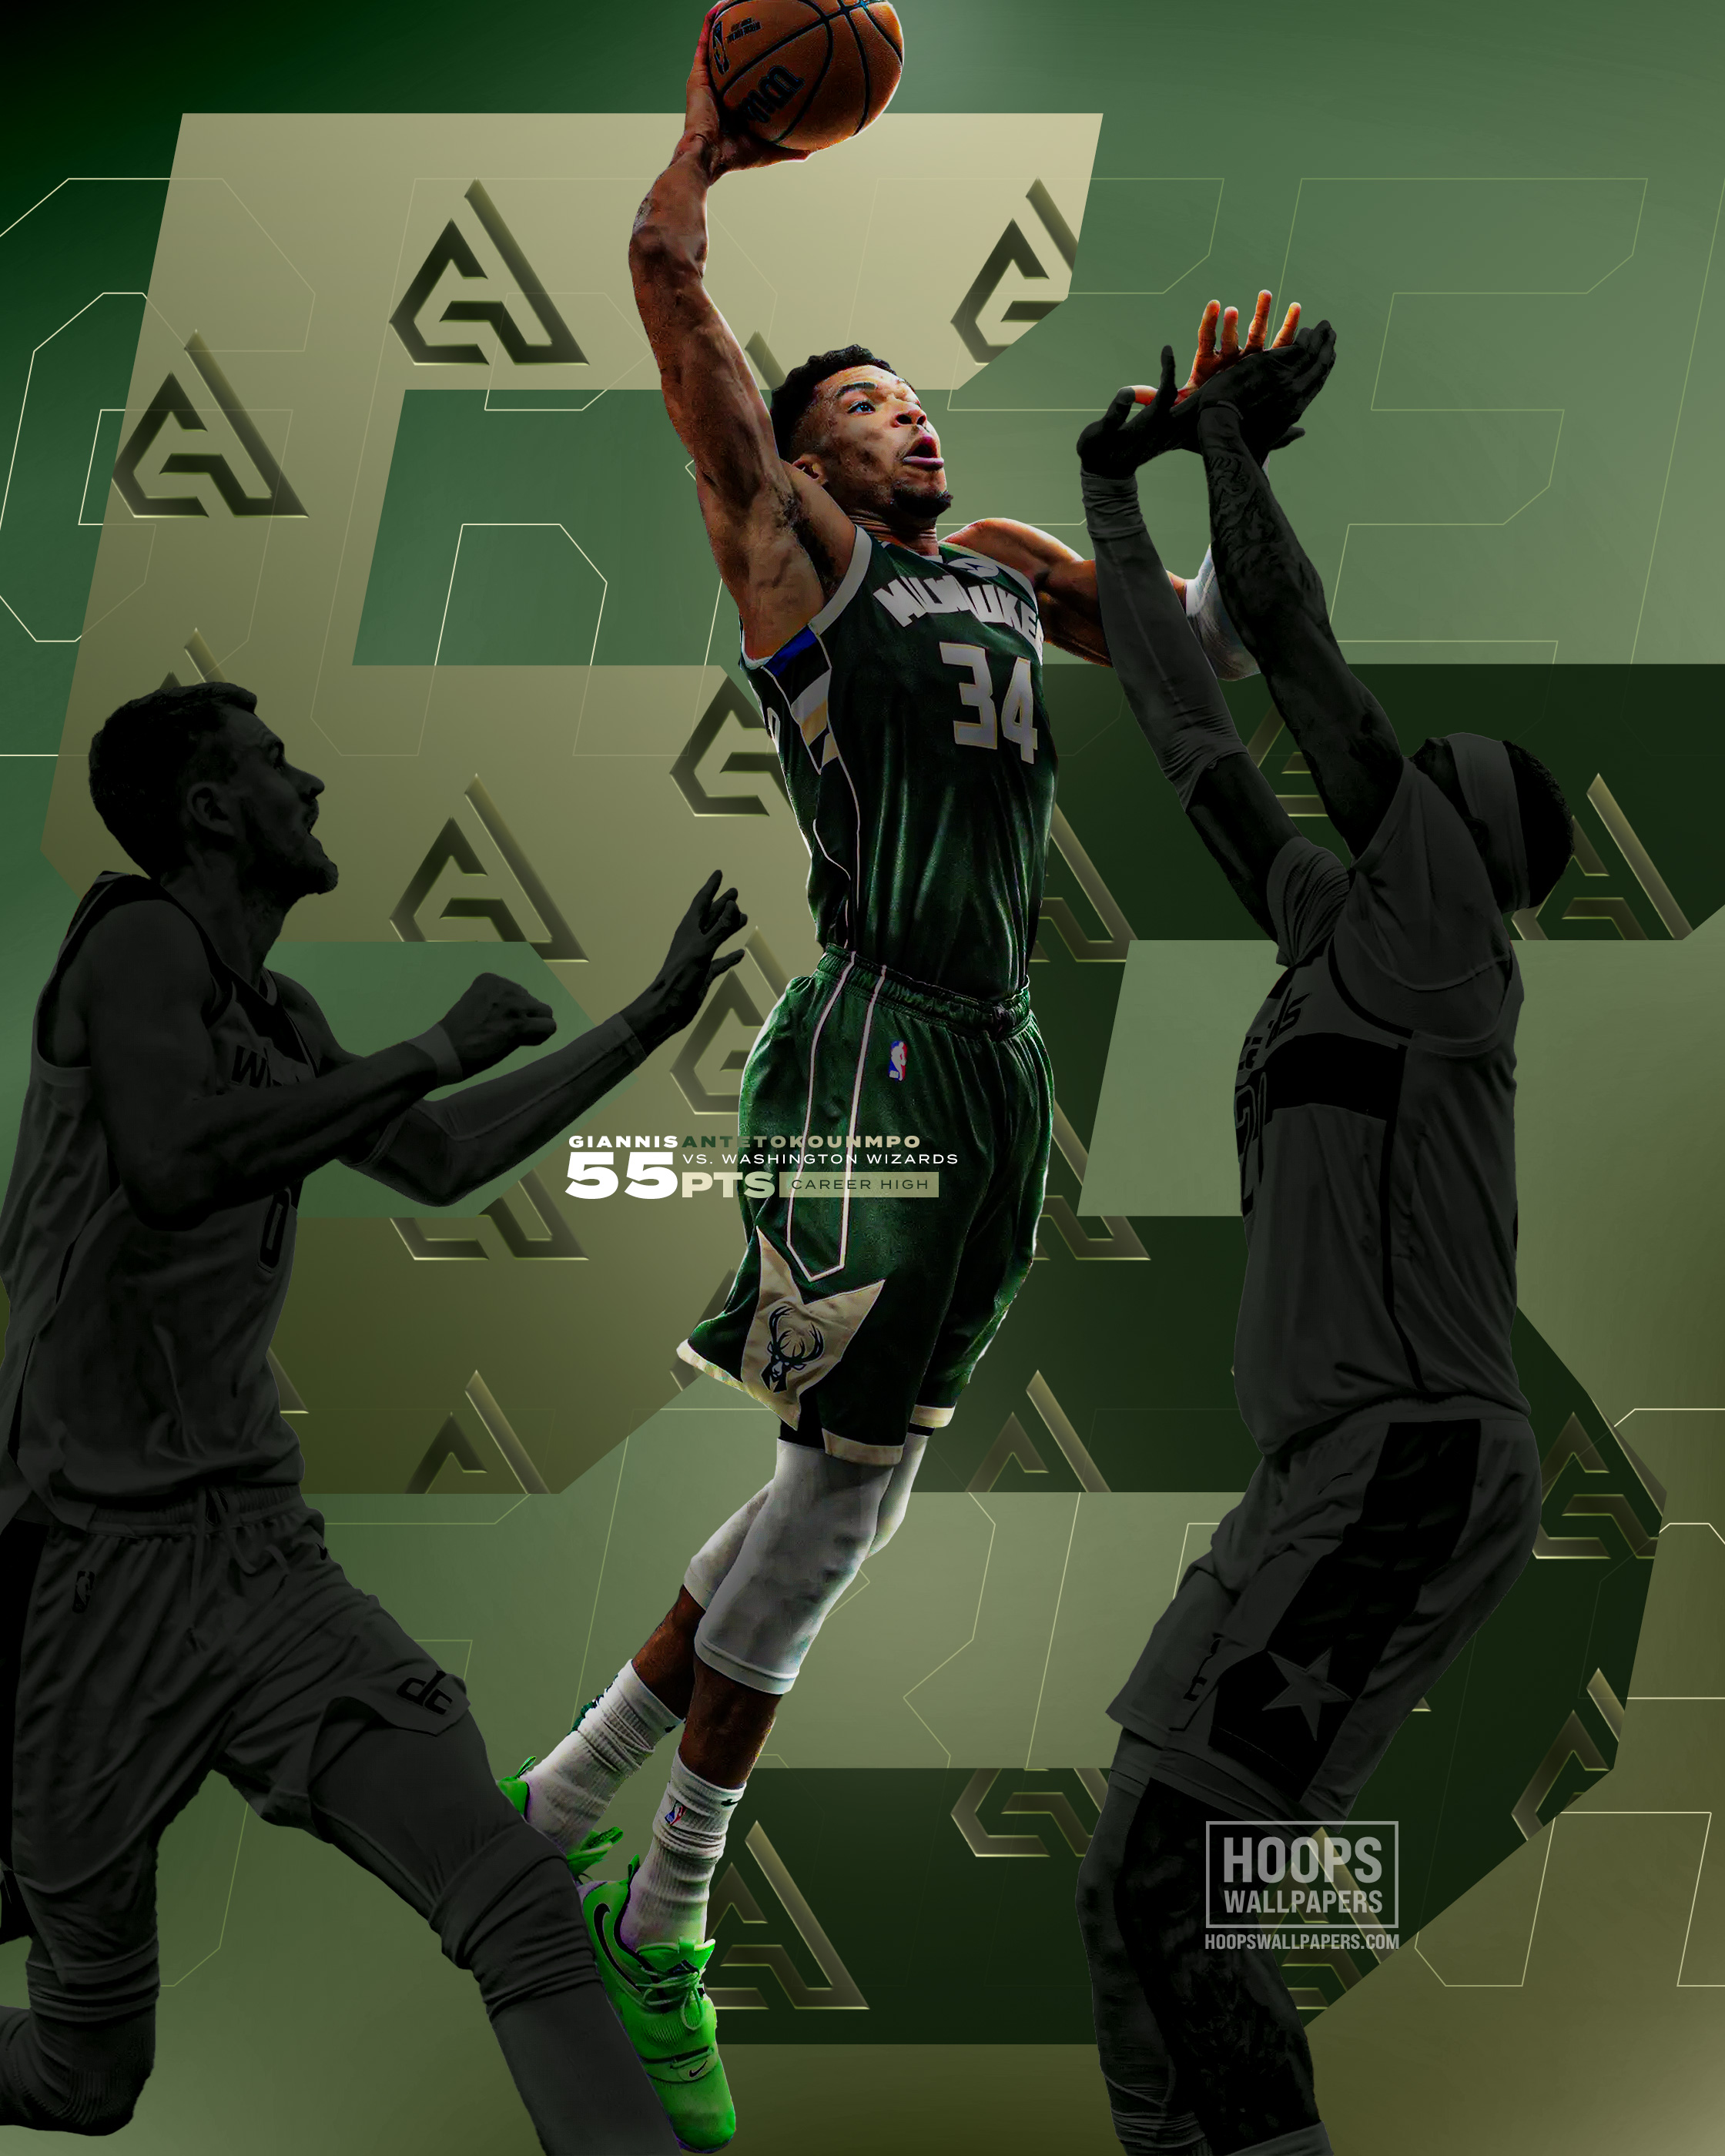 Download Kyrie Irving and his signature-edition iPhone Wallpaper